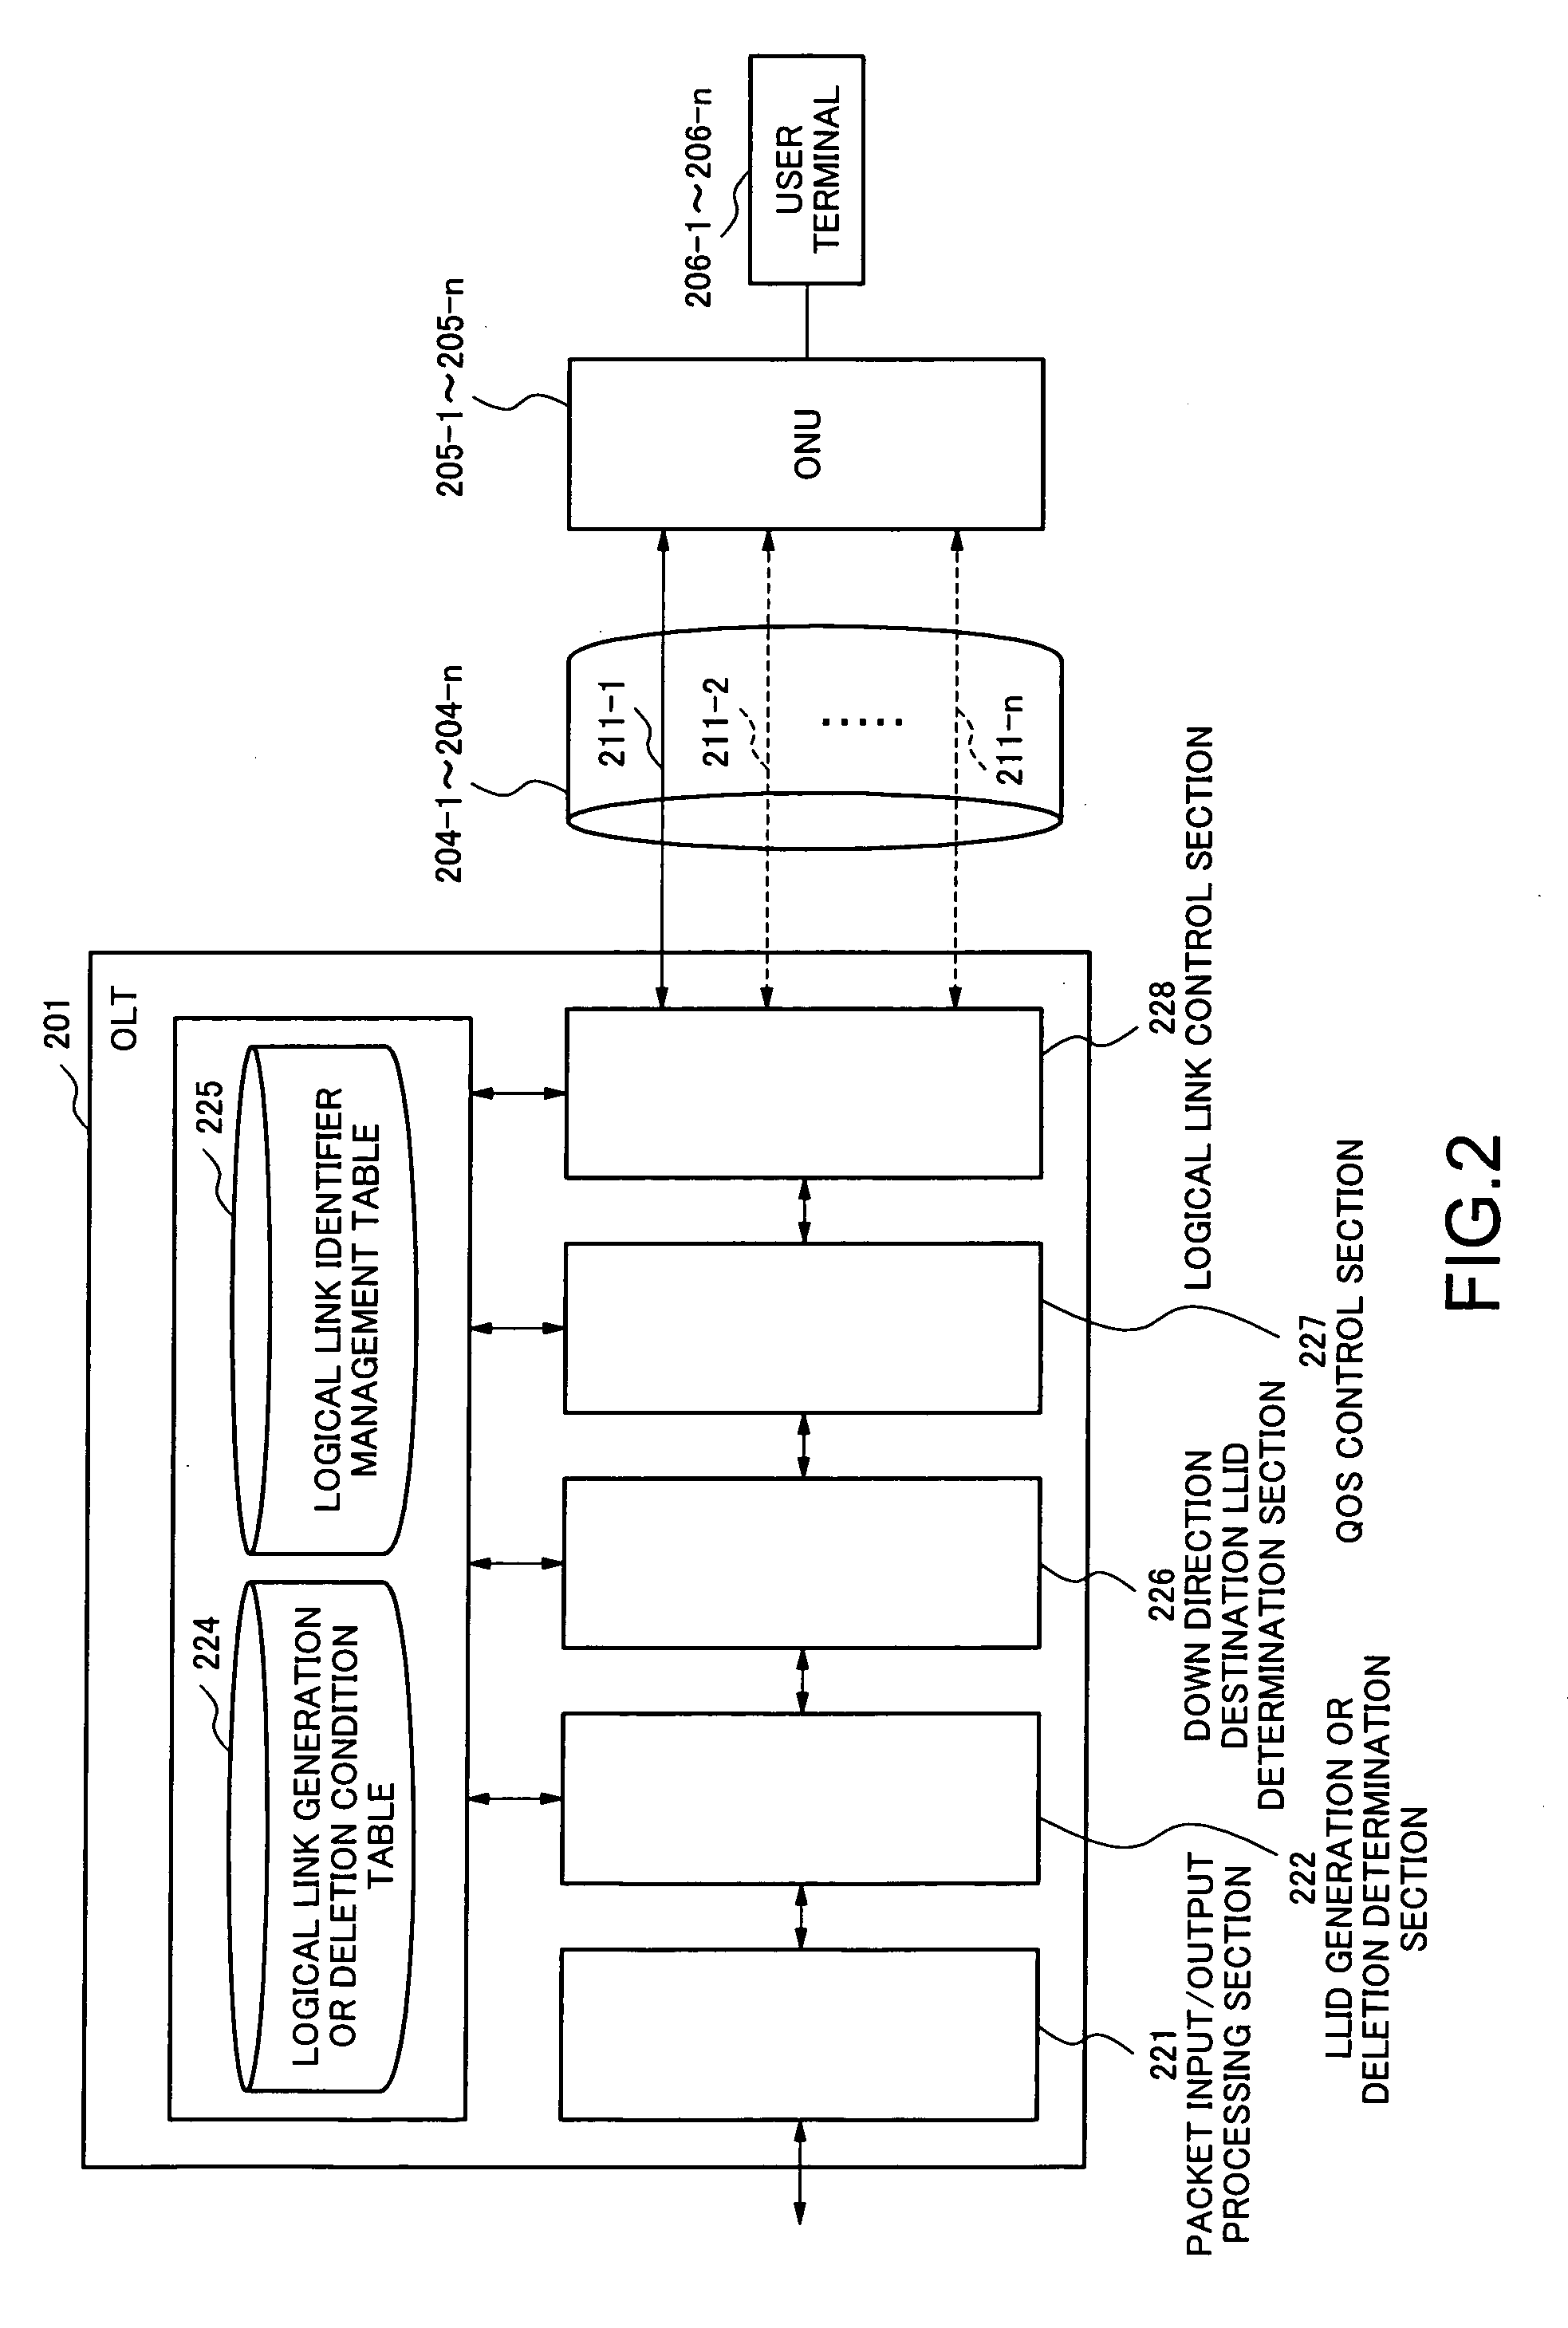 PON system and logical link allocation method